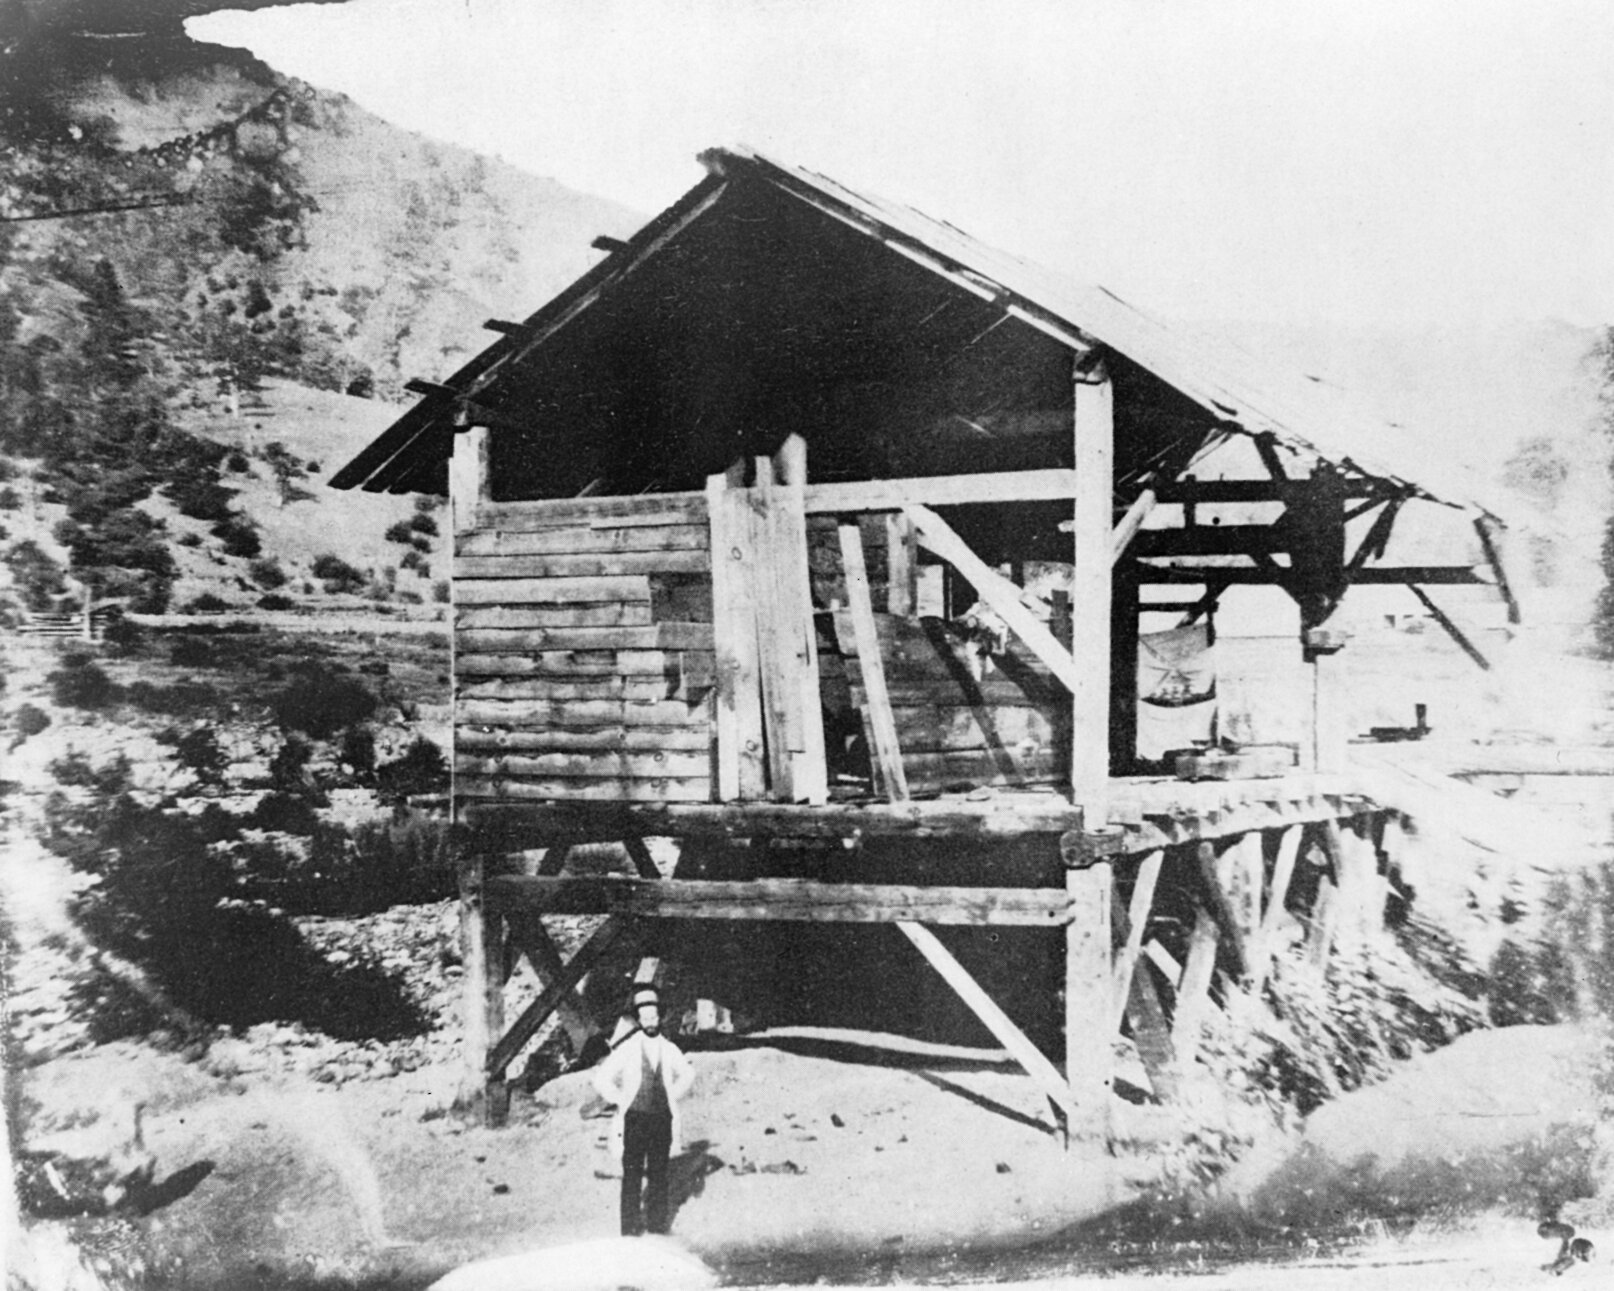 PICTURED: Sutter's sawmill, Coloma, California, where gold was first discovered in California.